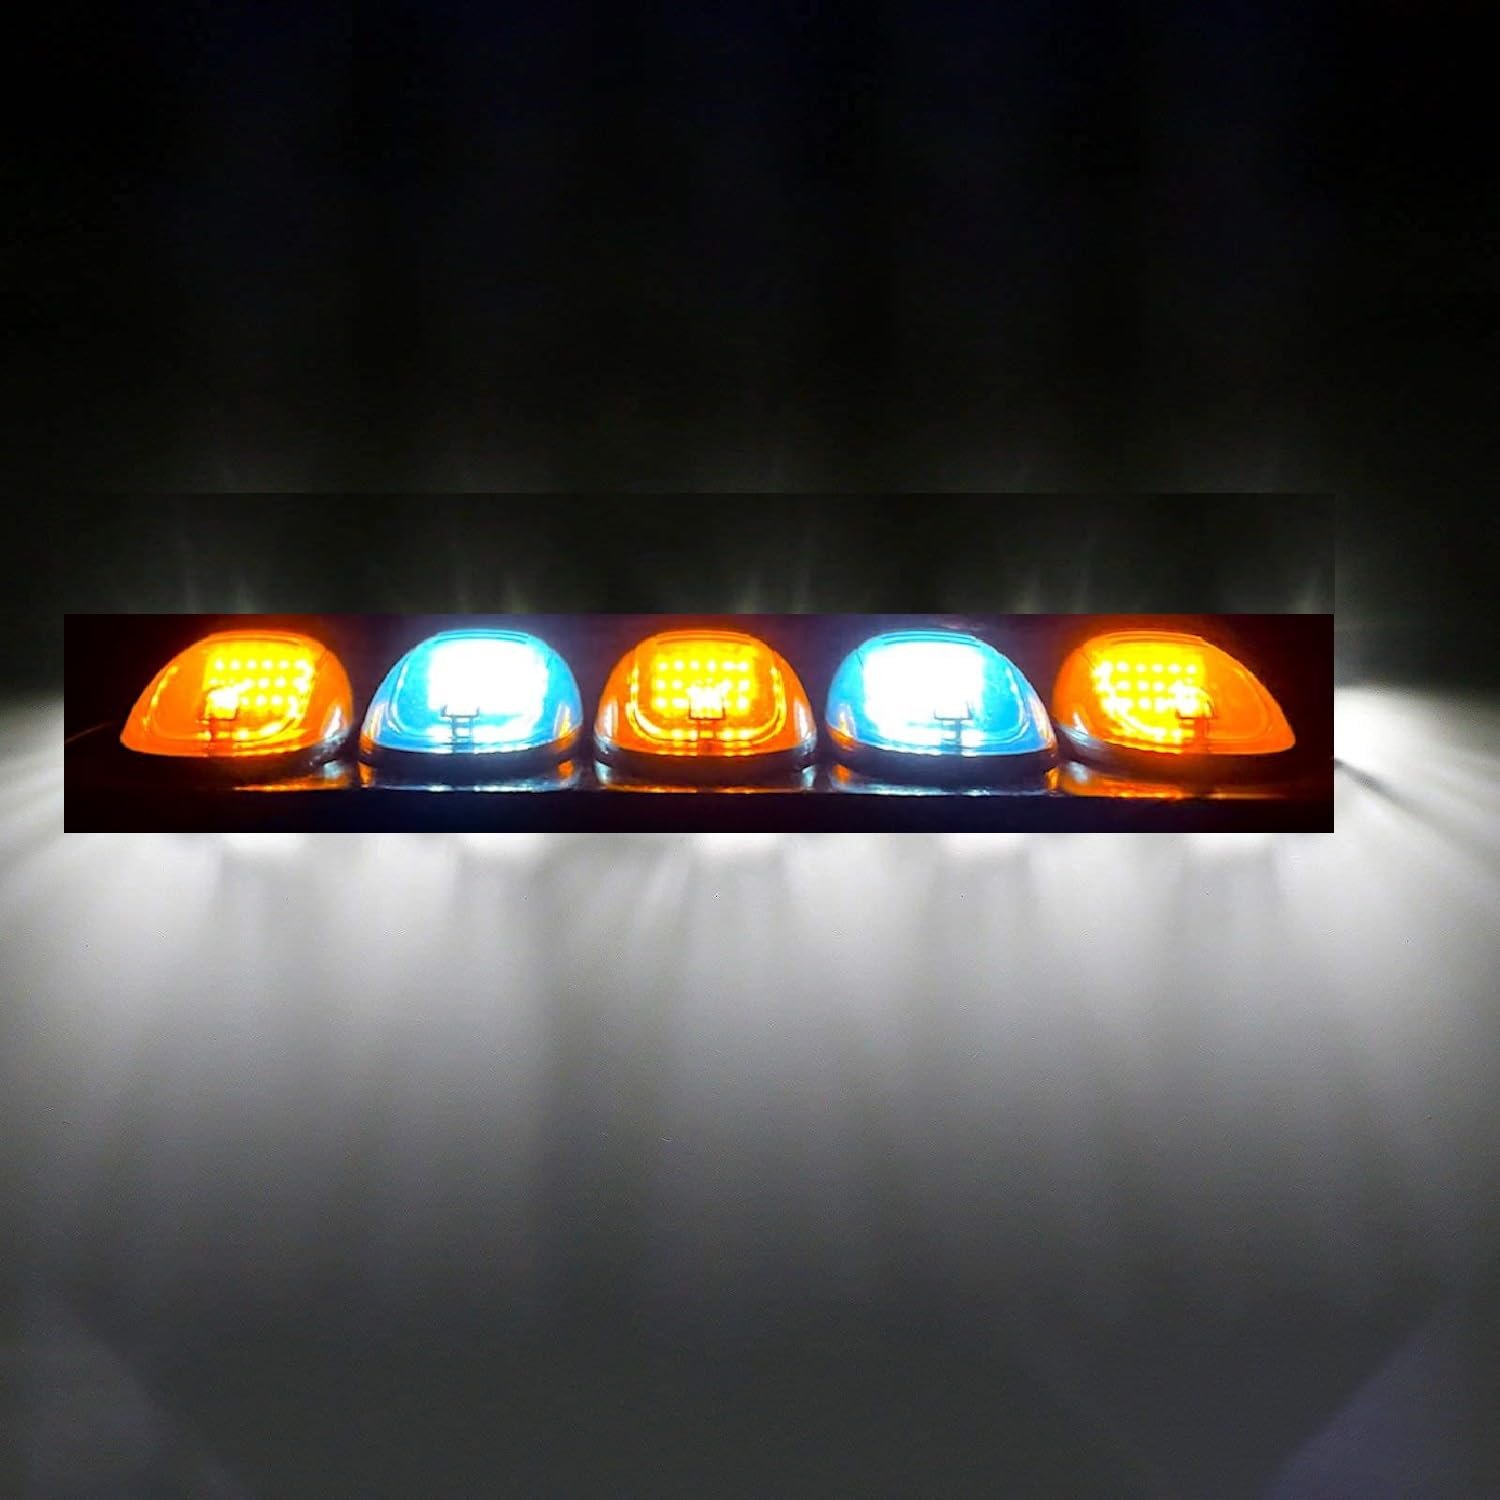 Hummer Roof Marker Lights Smoked white Glass Universal For Cars Set of 5 PC Fancy Lights (3 Amber and 2 White) Image 